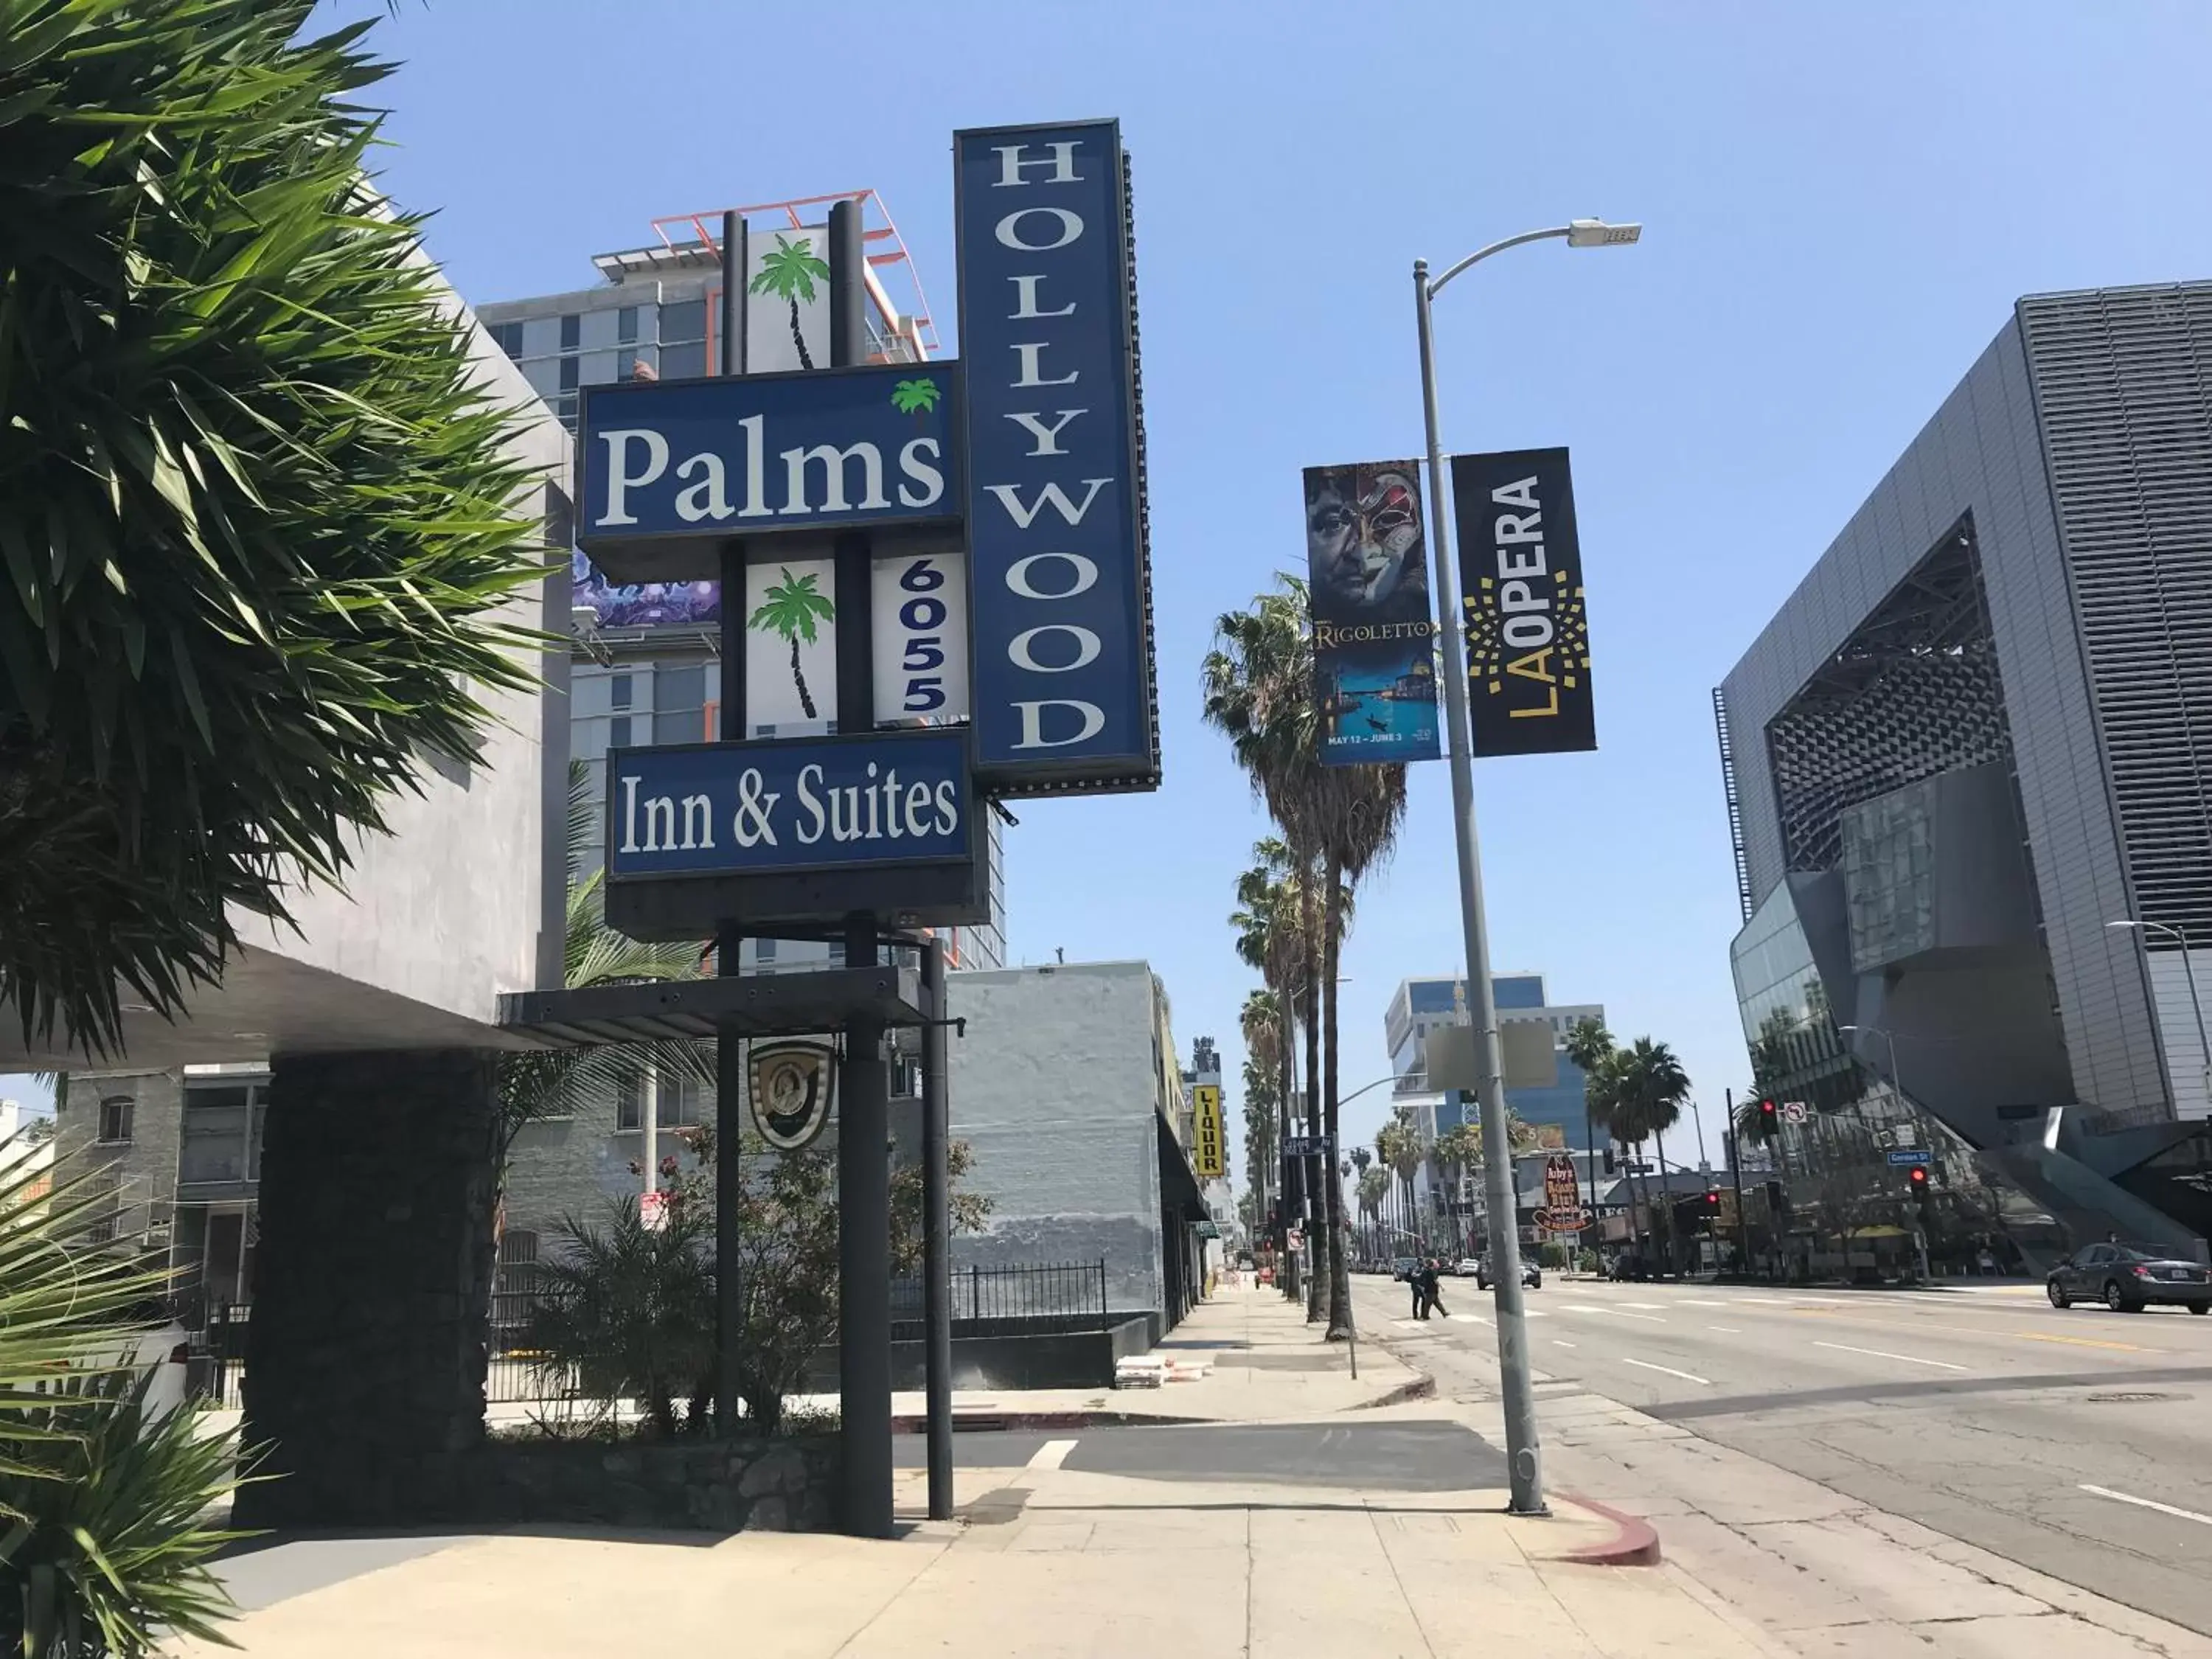 Property Building in Hollywood Palms Inns & Suites